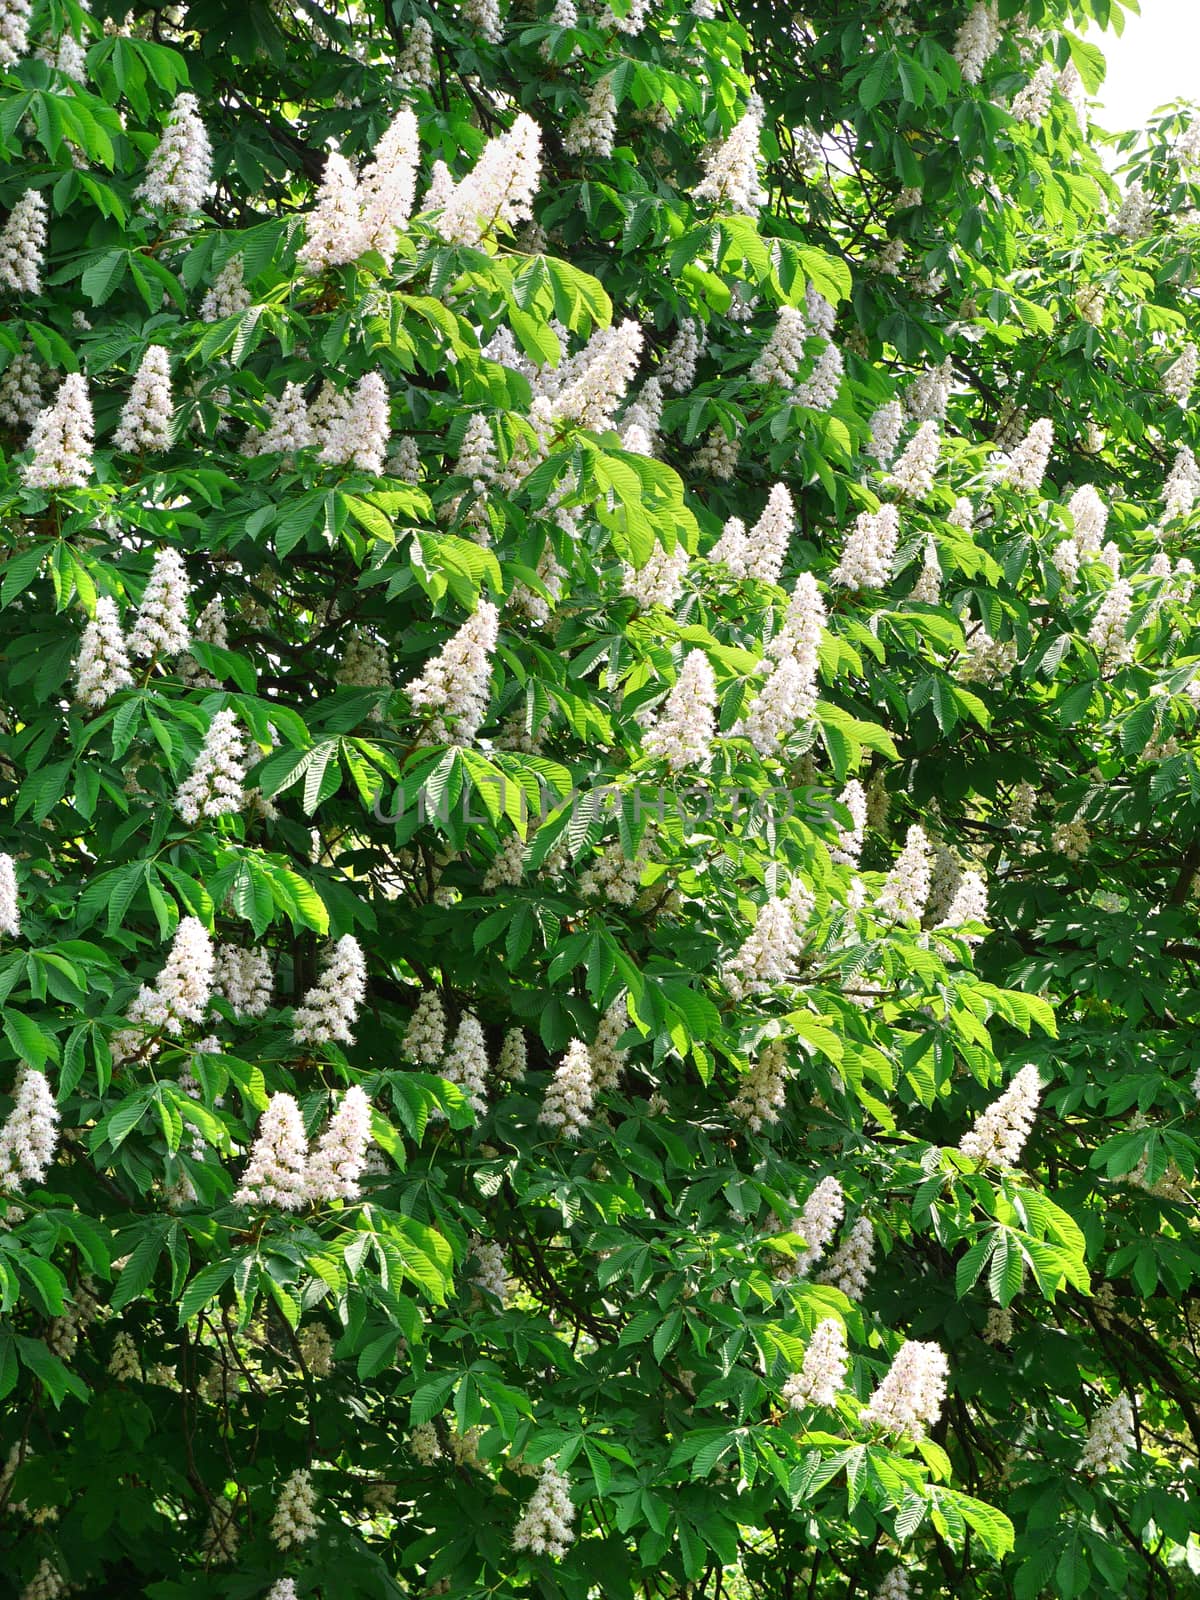 Picturesque lush chestnut trees with fresh green foliage with blooming white candles.